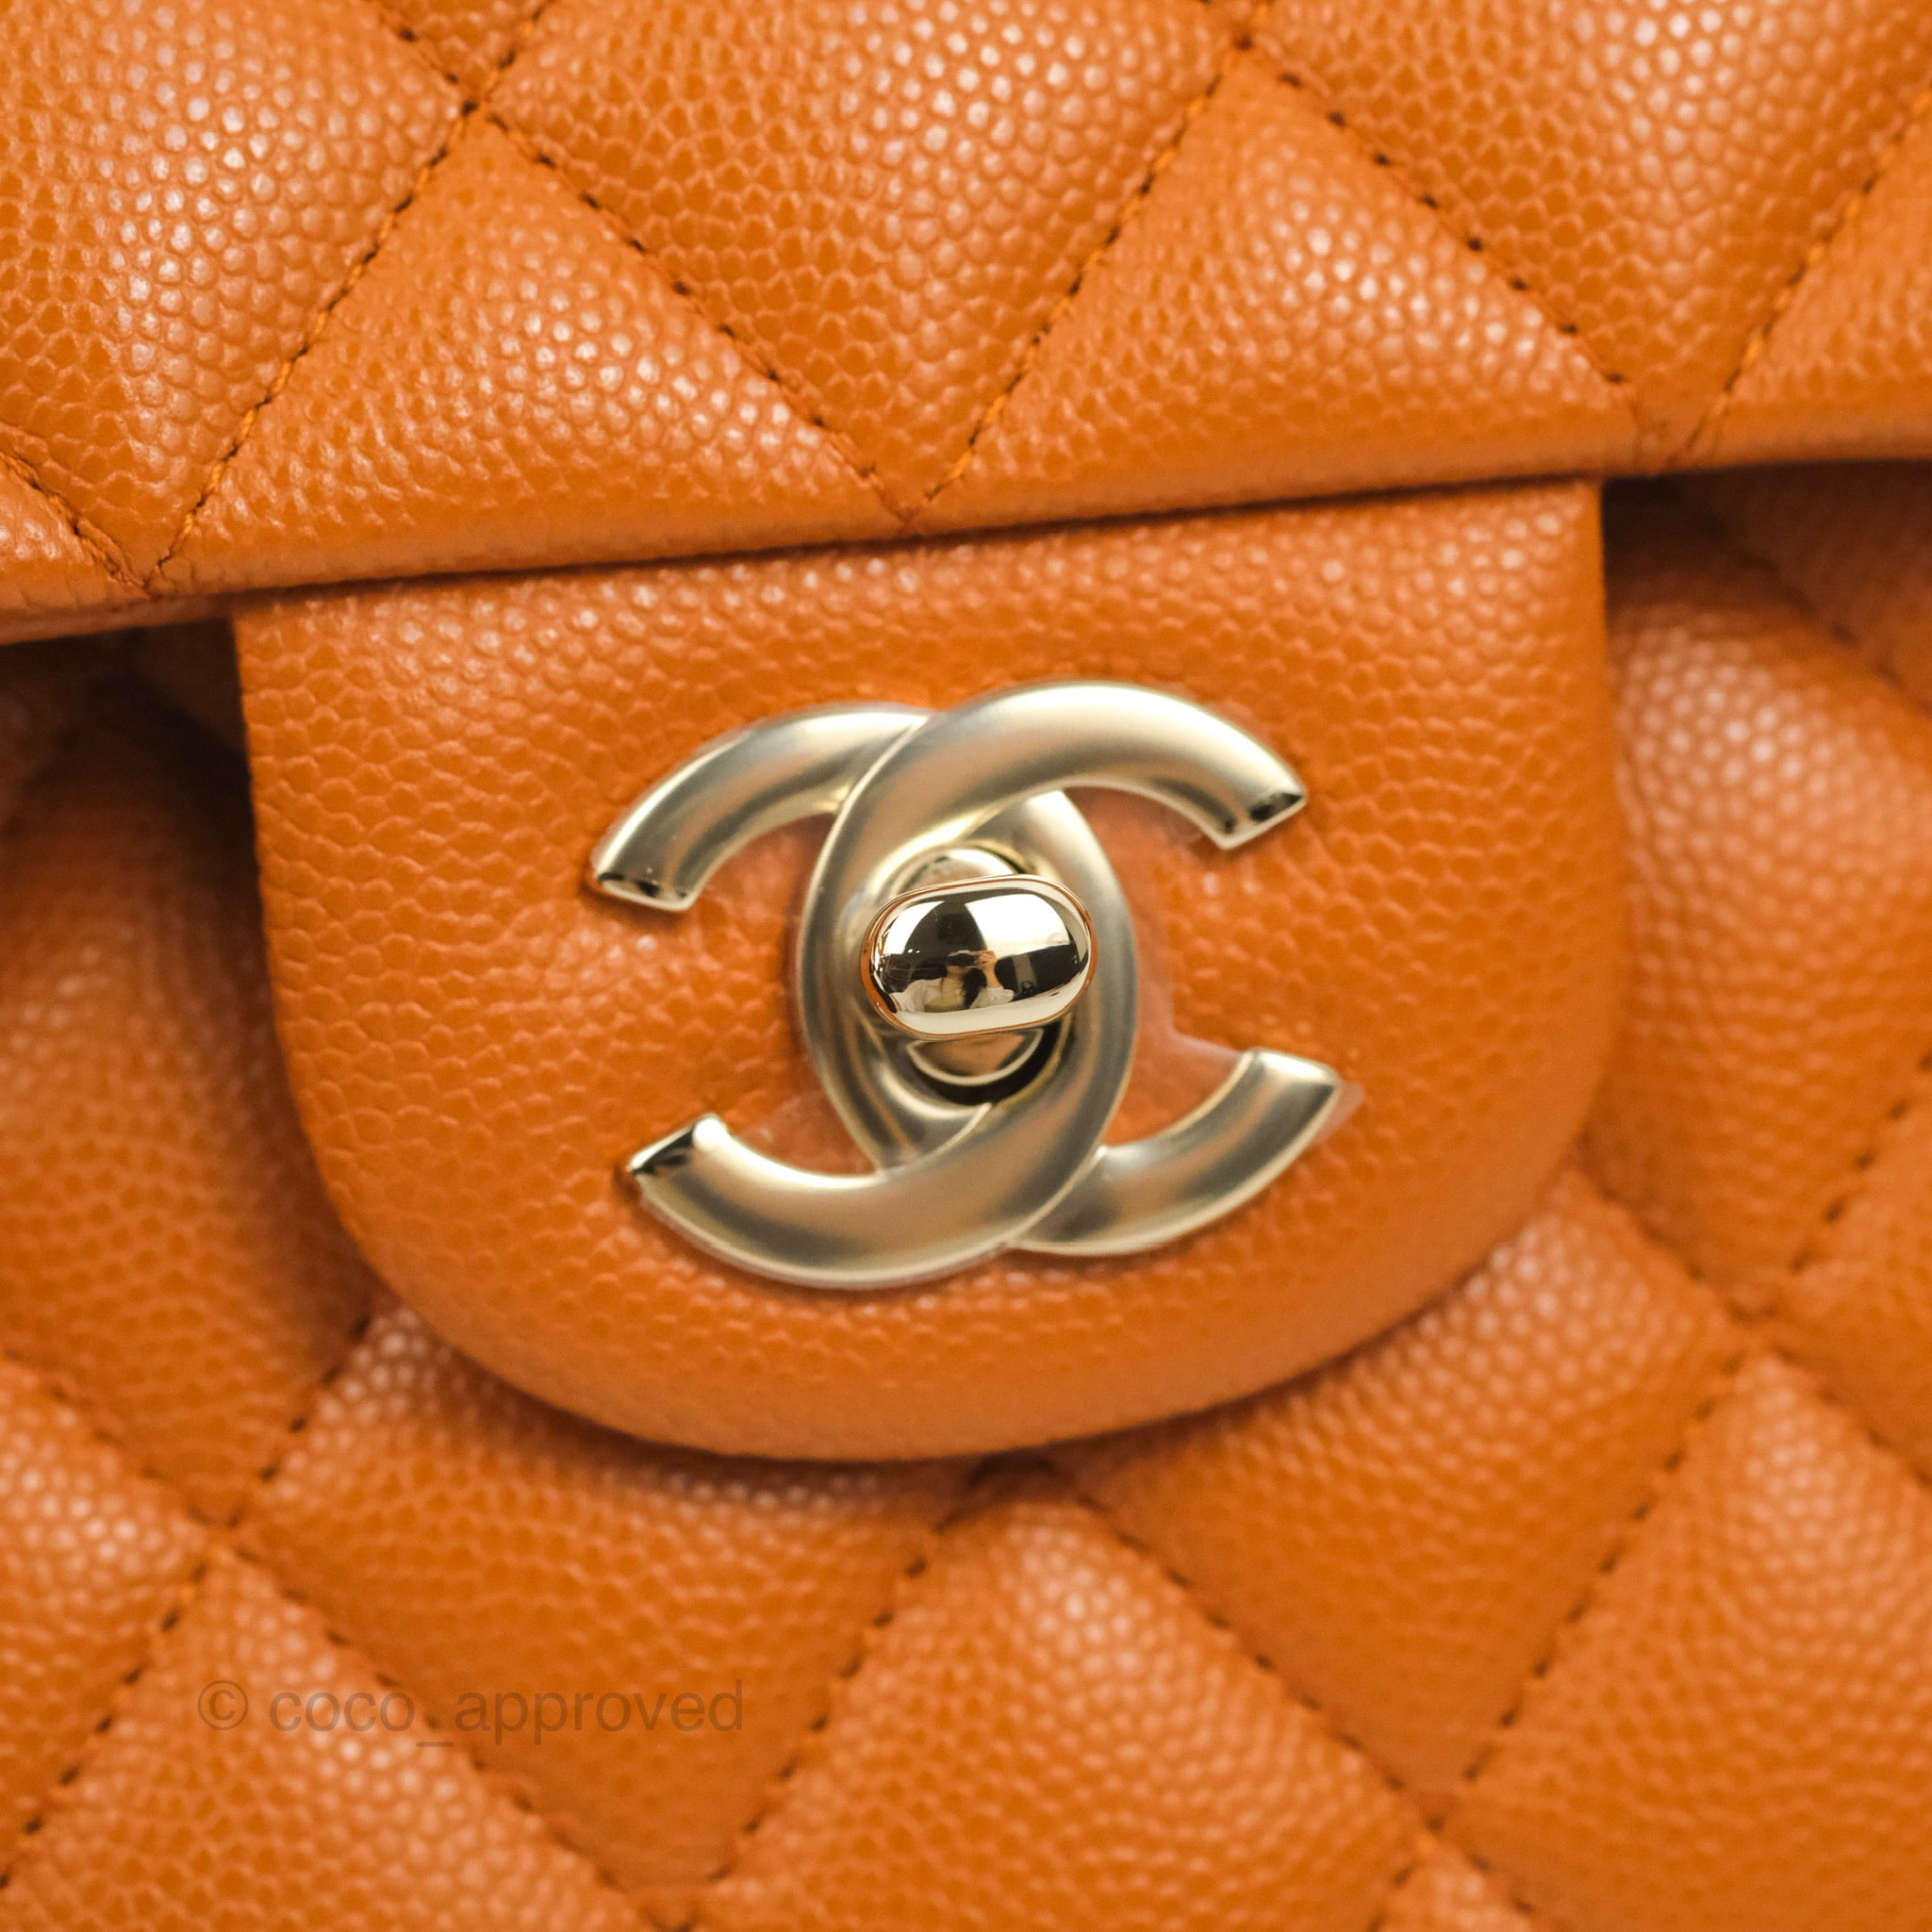 CHANEL Small Classic Double Flap Bag in 20C Grey Caviar